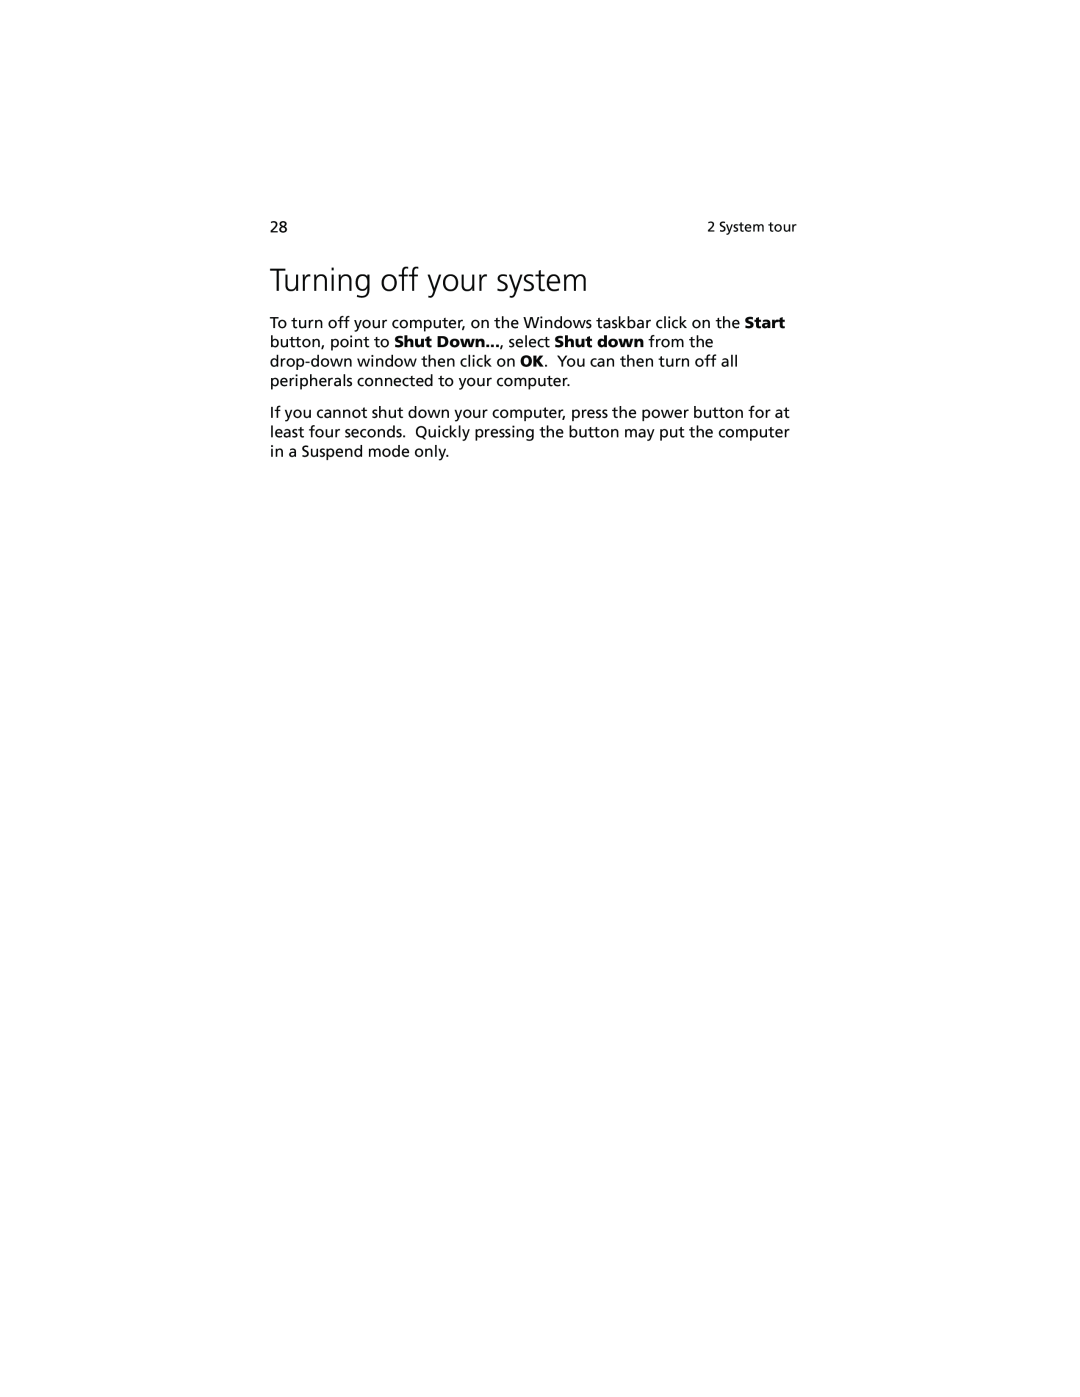 Acer Altos G610 manual Turning off your system 